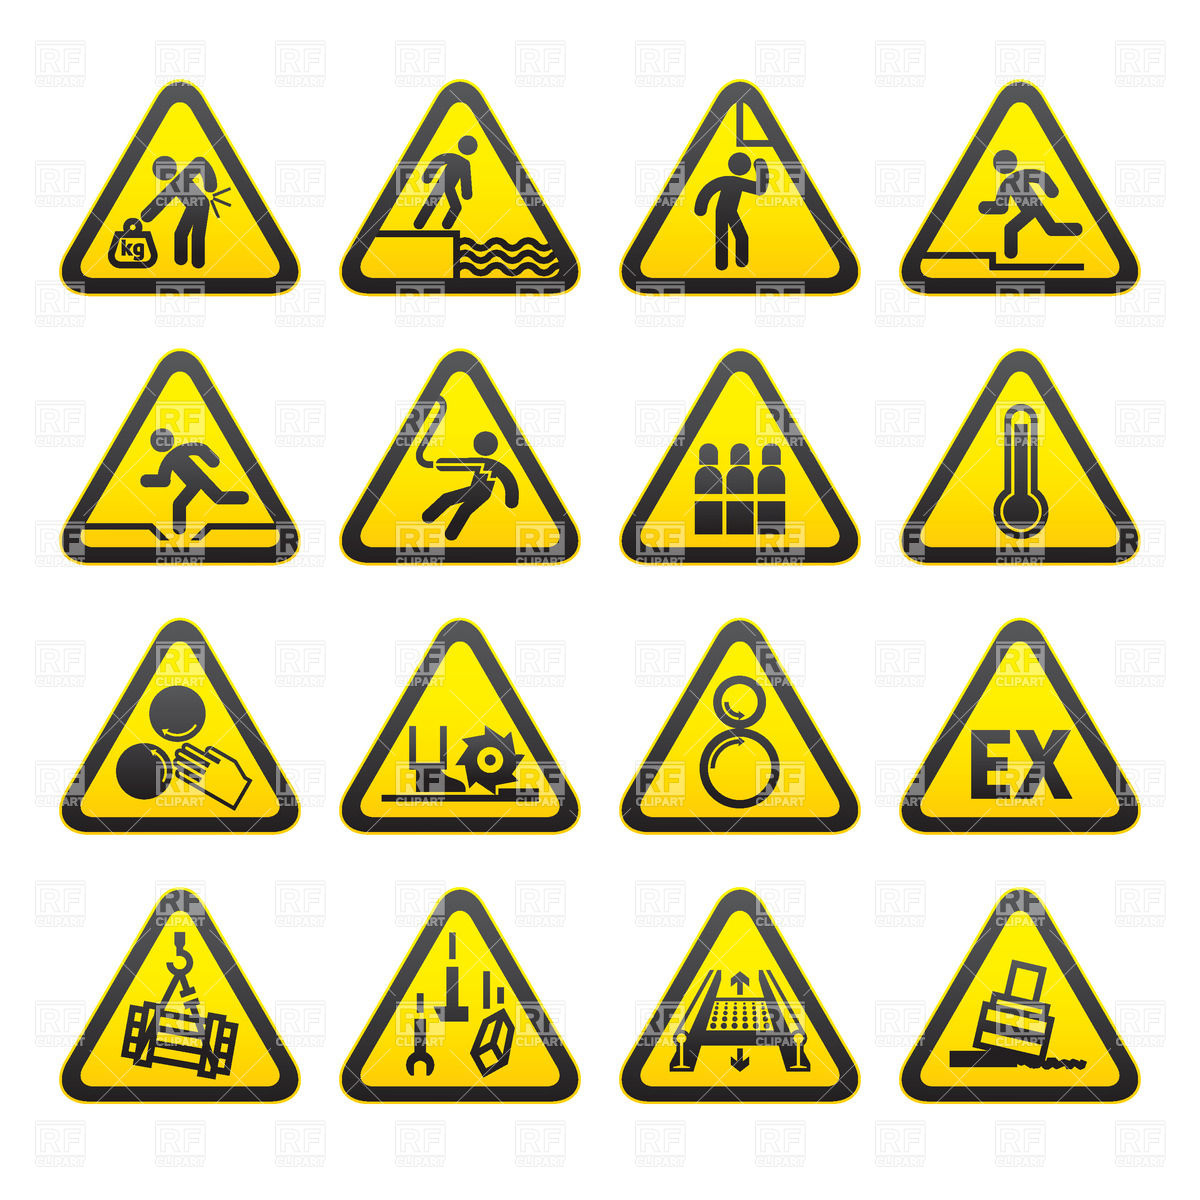 Triangular Warning Signs   Hazard Actions And Accidental Operations